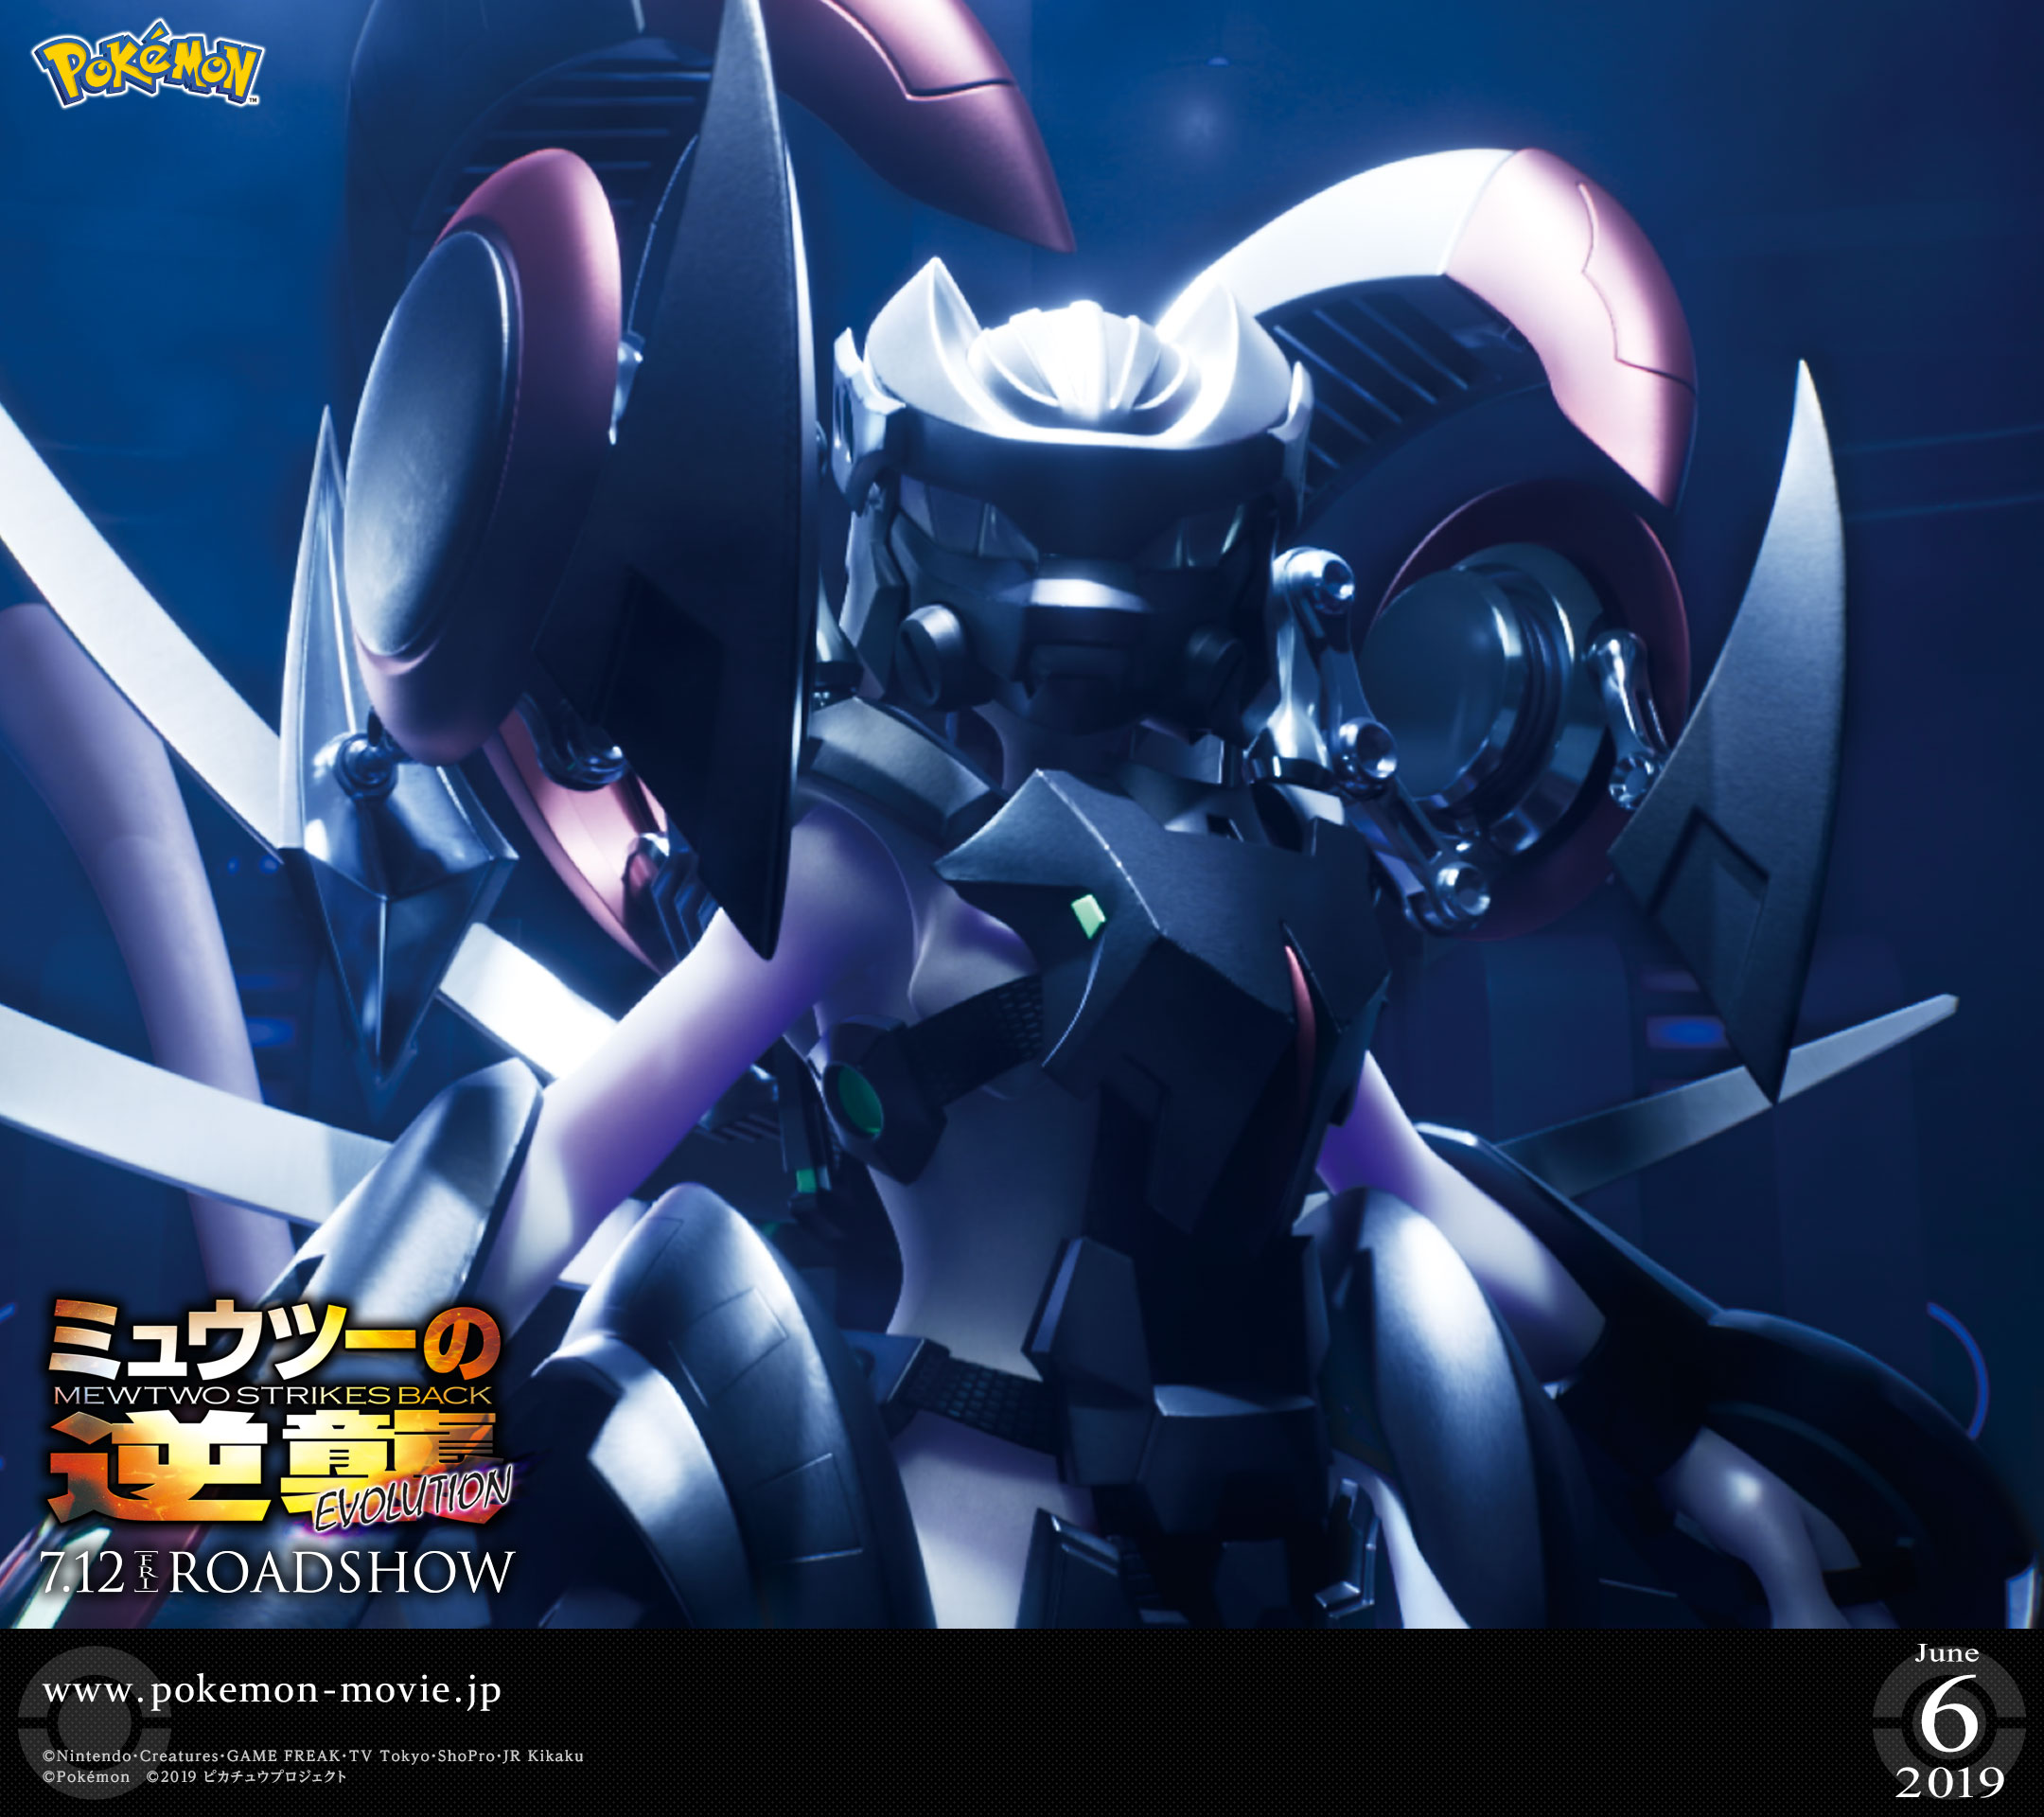 Download A Free Wallpaper Of Armored Mewtwo For Pc And Smartphone